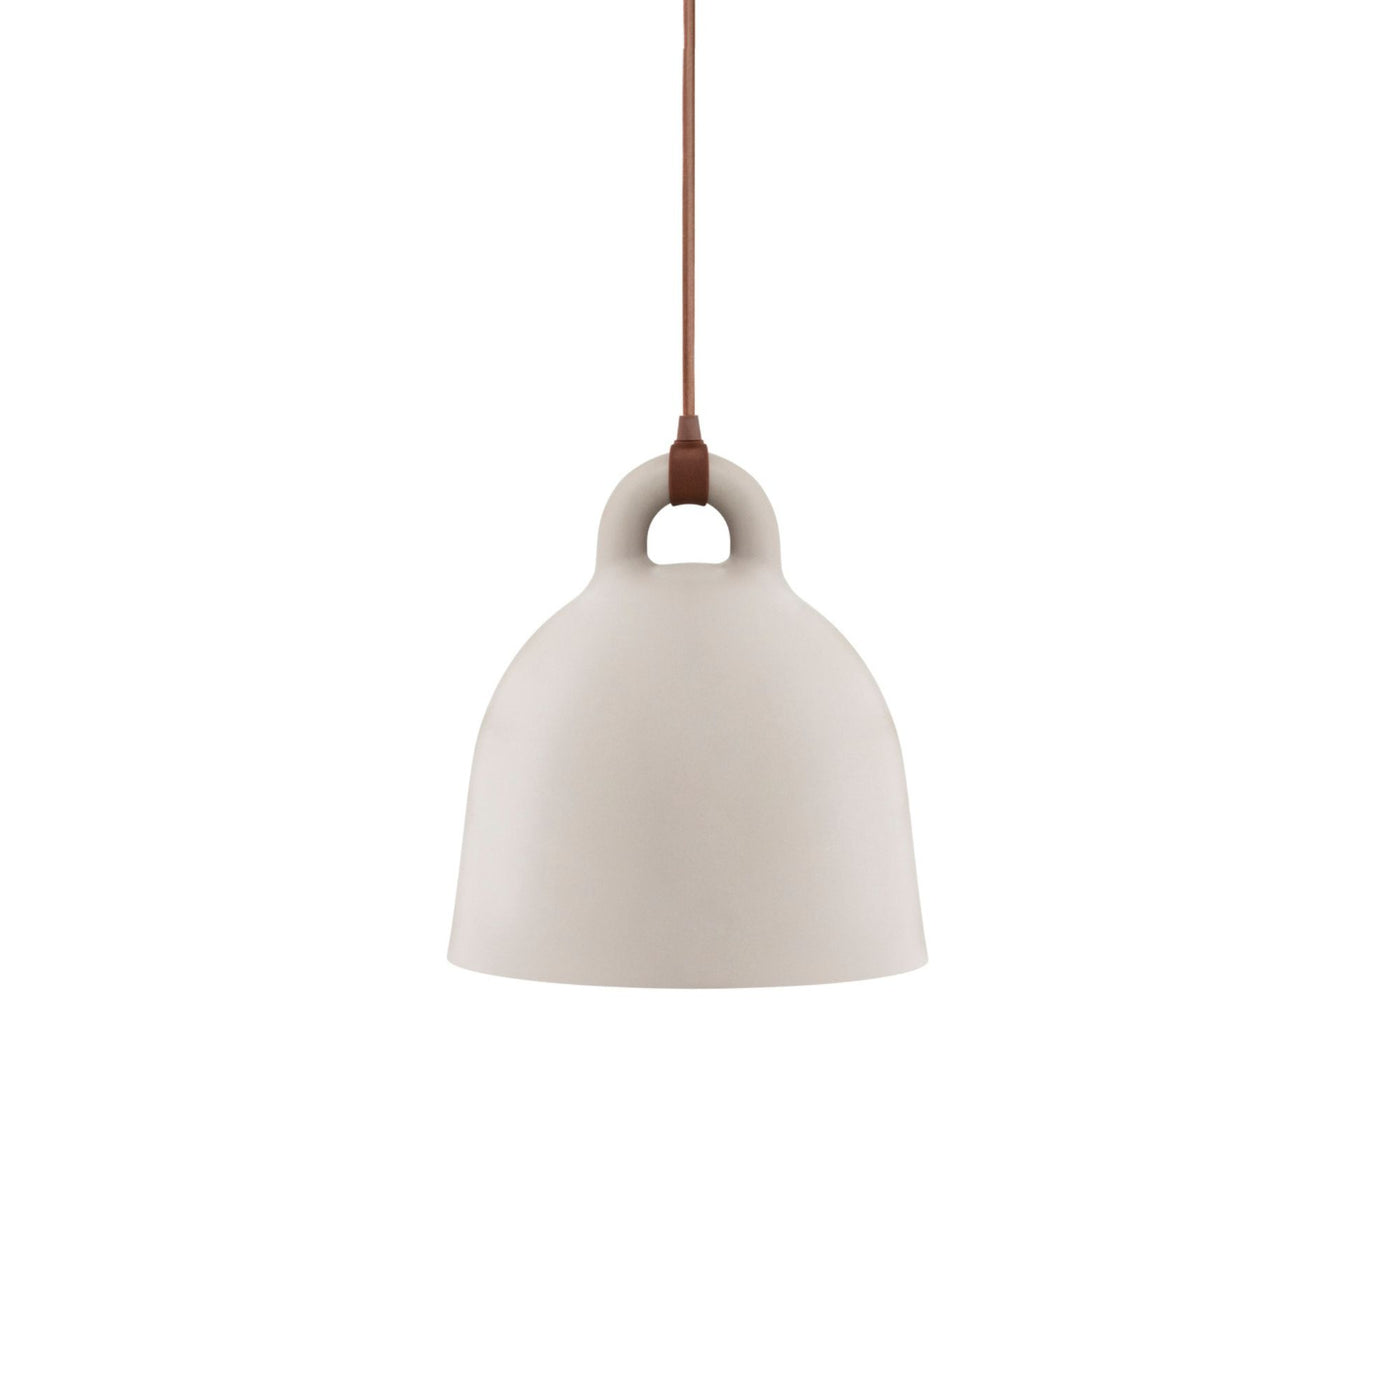 Norman Copenhagen Bell Pendant Lamp in sand. Free UK delivery from someday designs #size_small